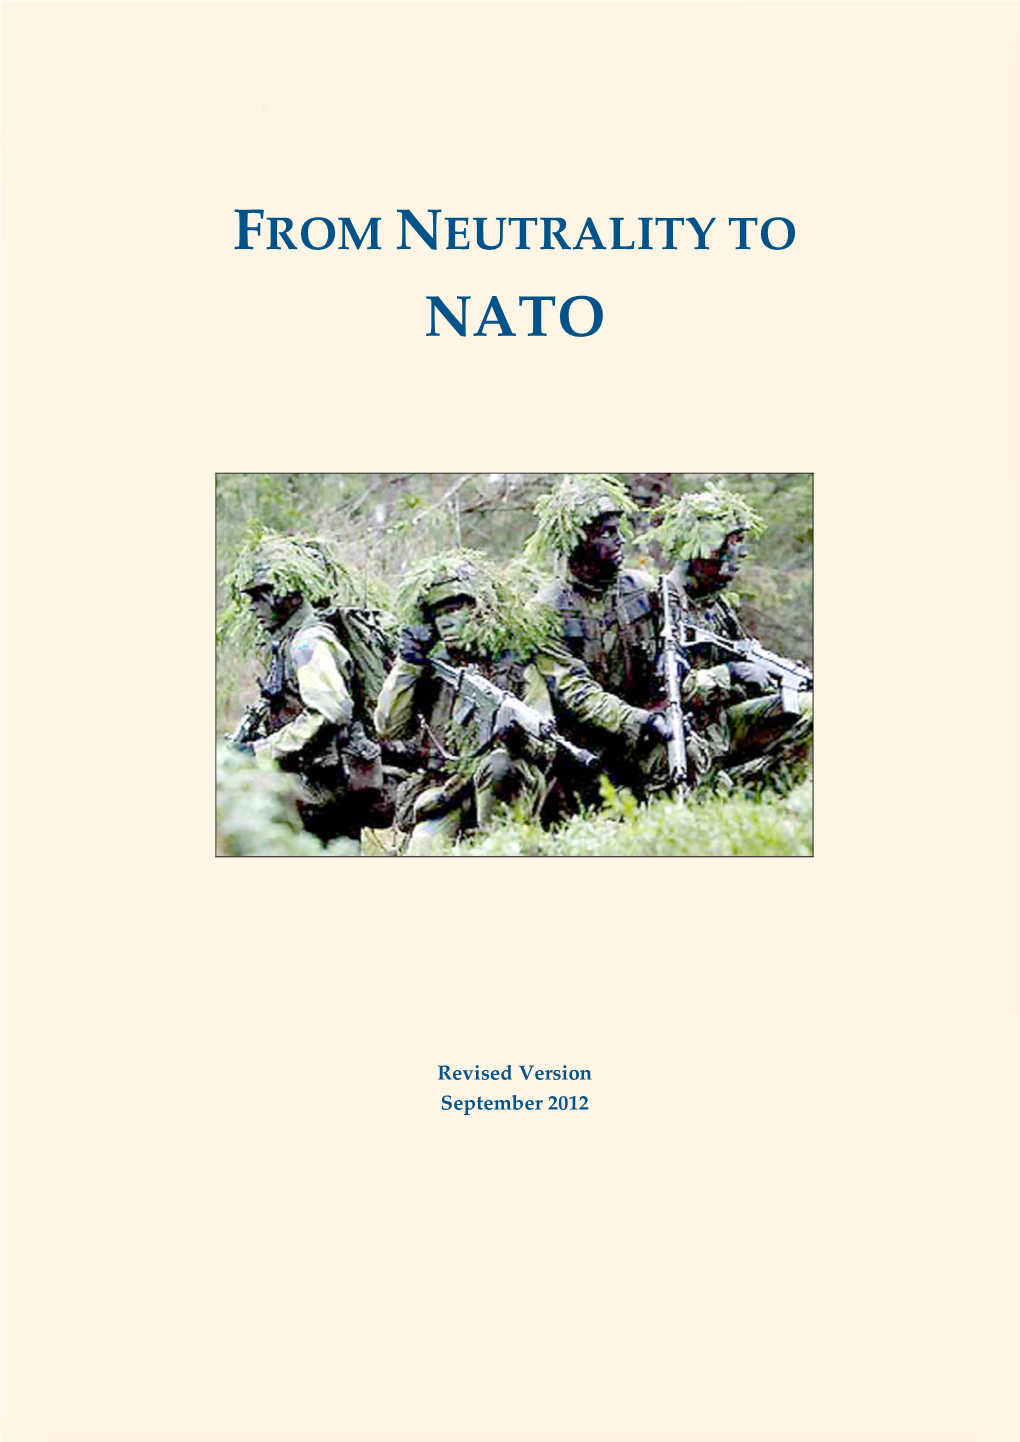 From Neutrality to Nato